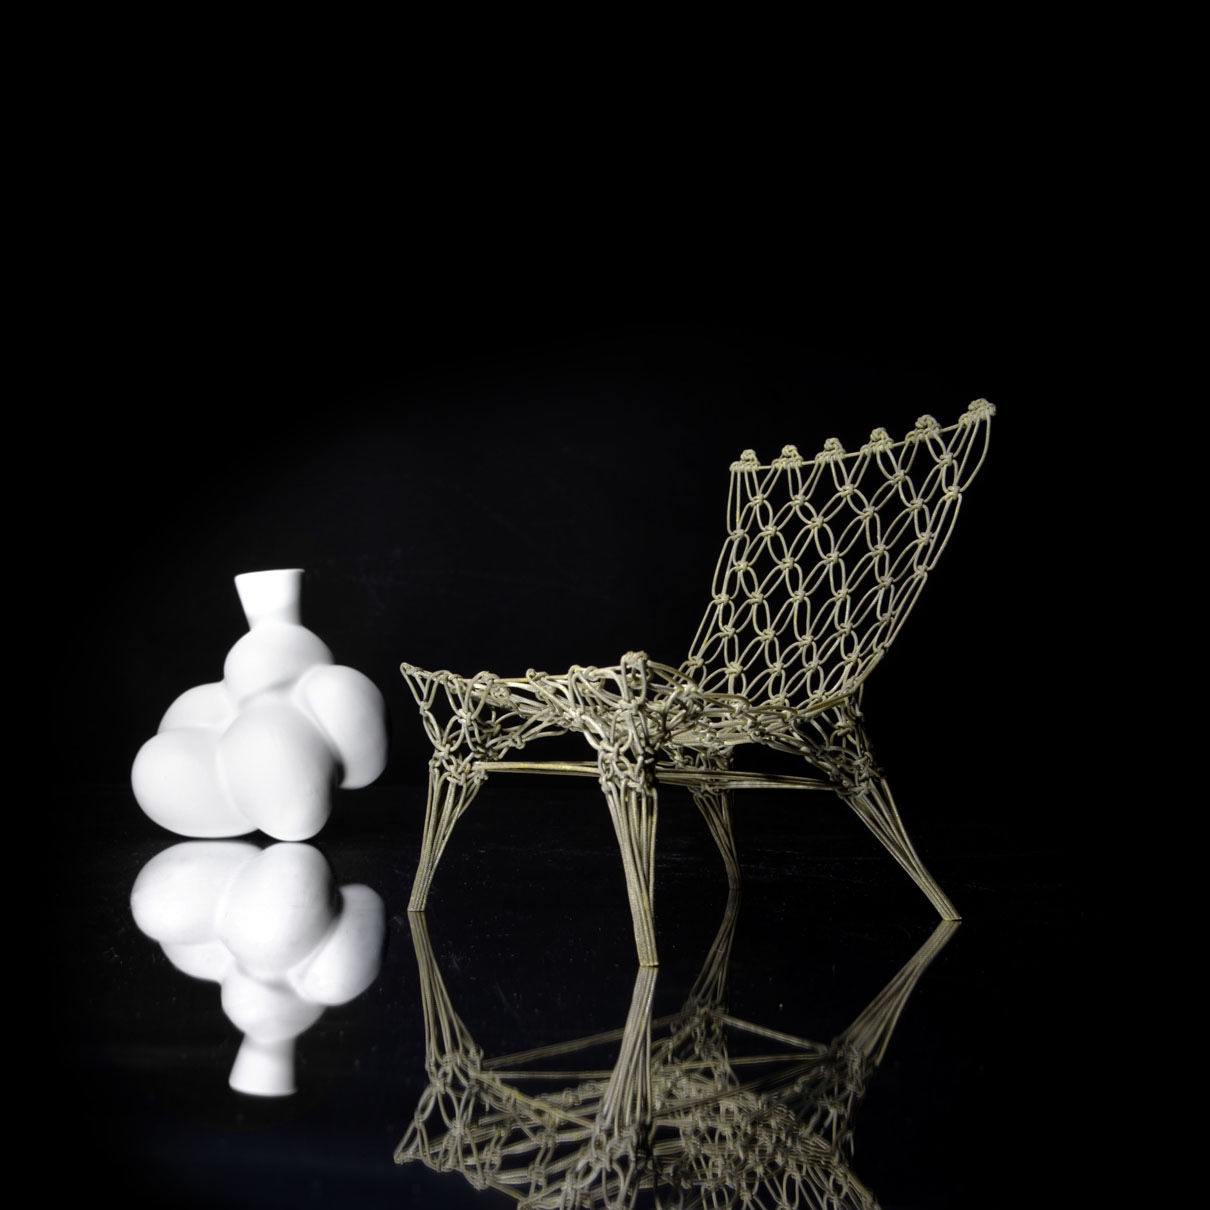 Knotted chair by Marcel Wanders.